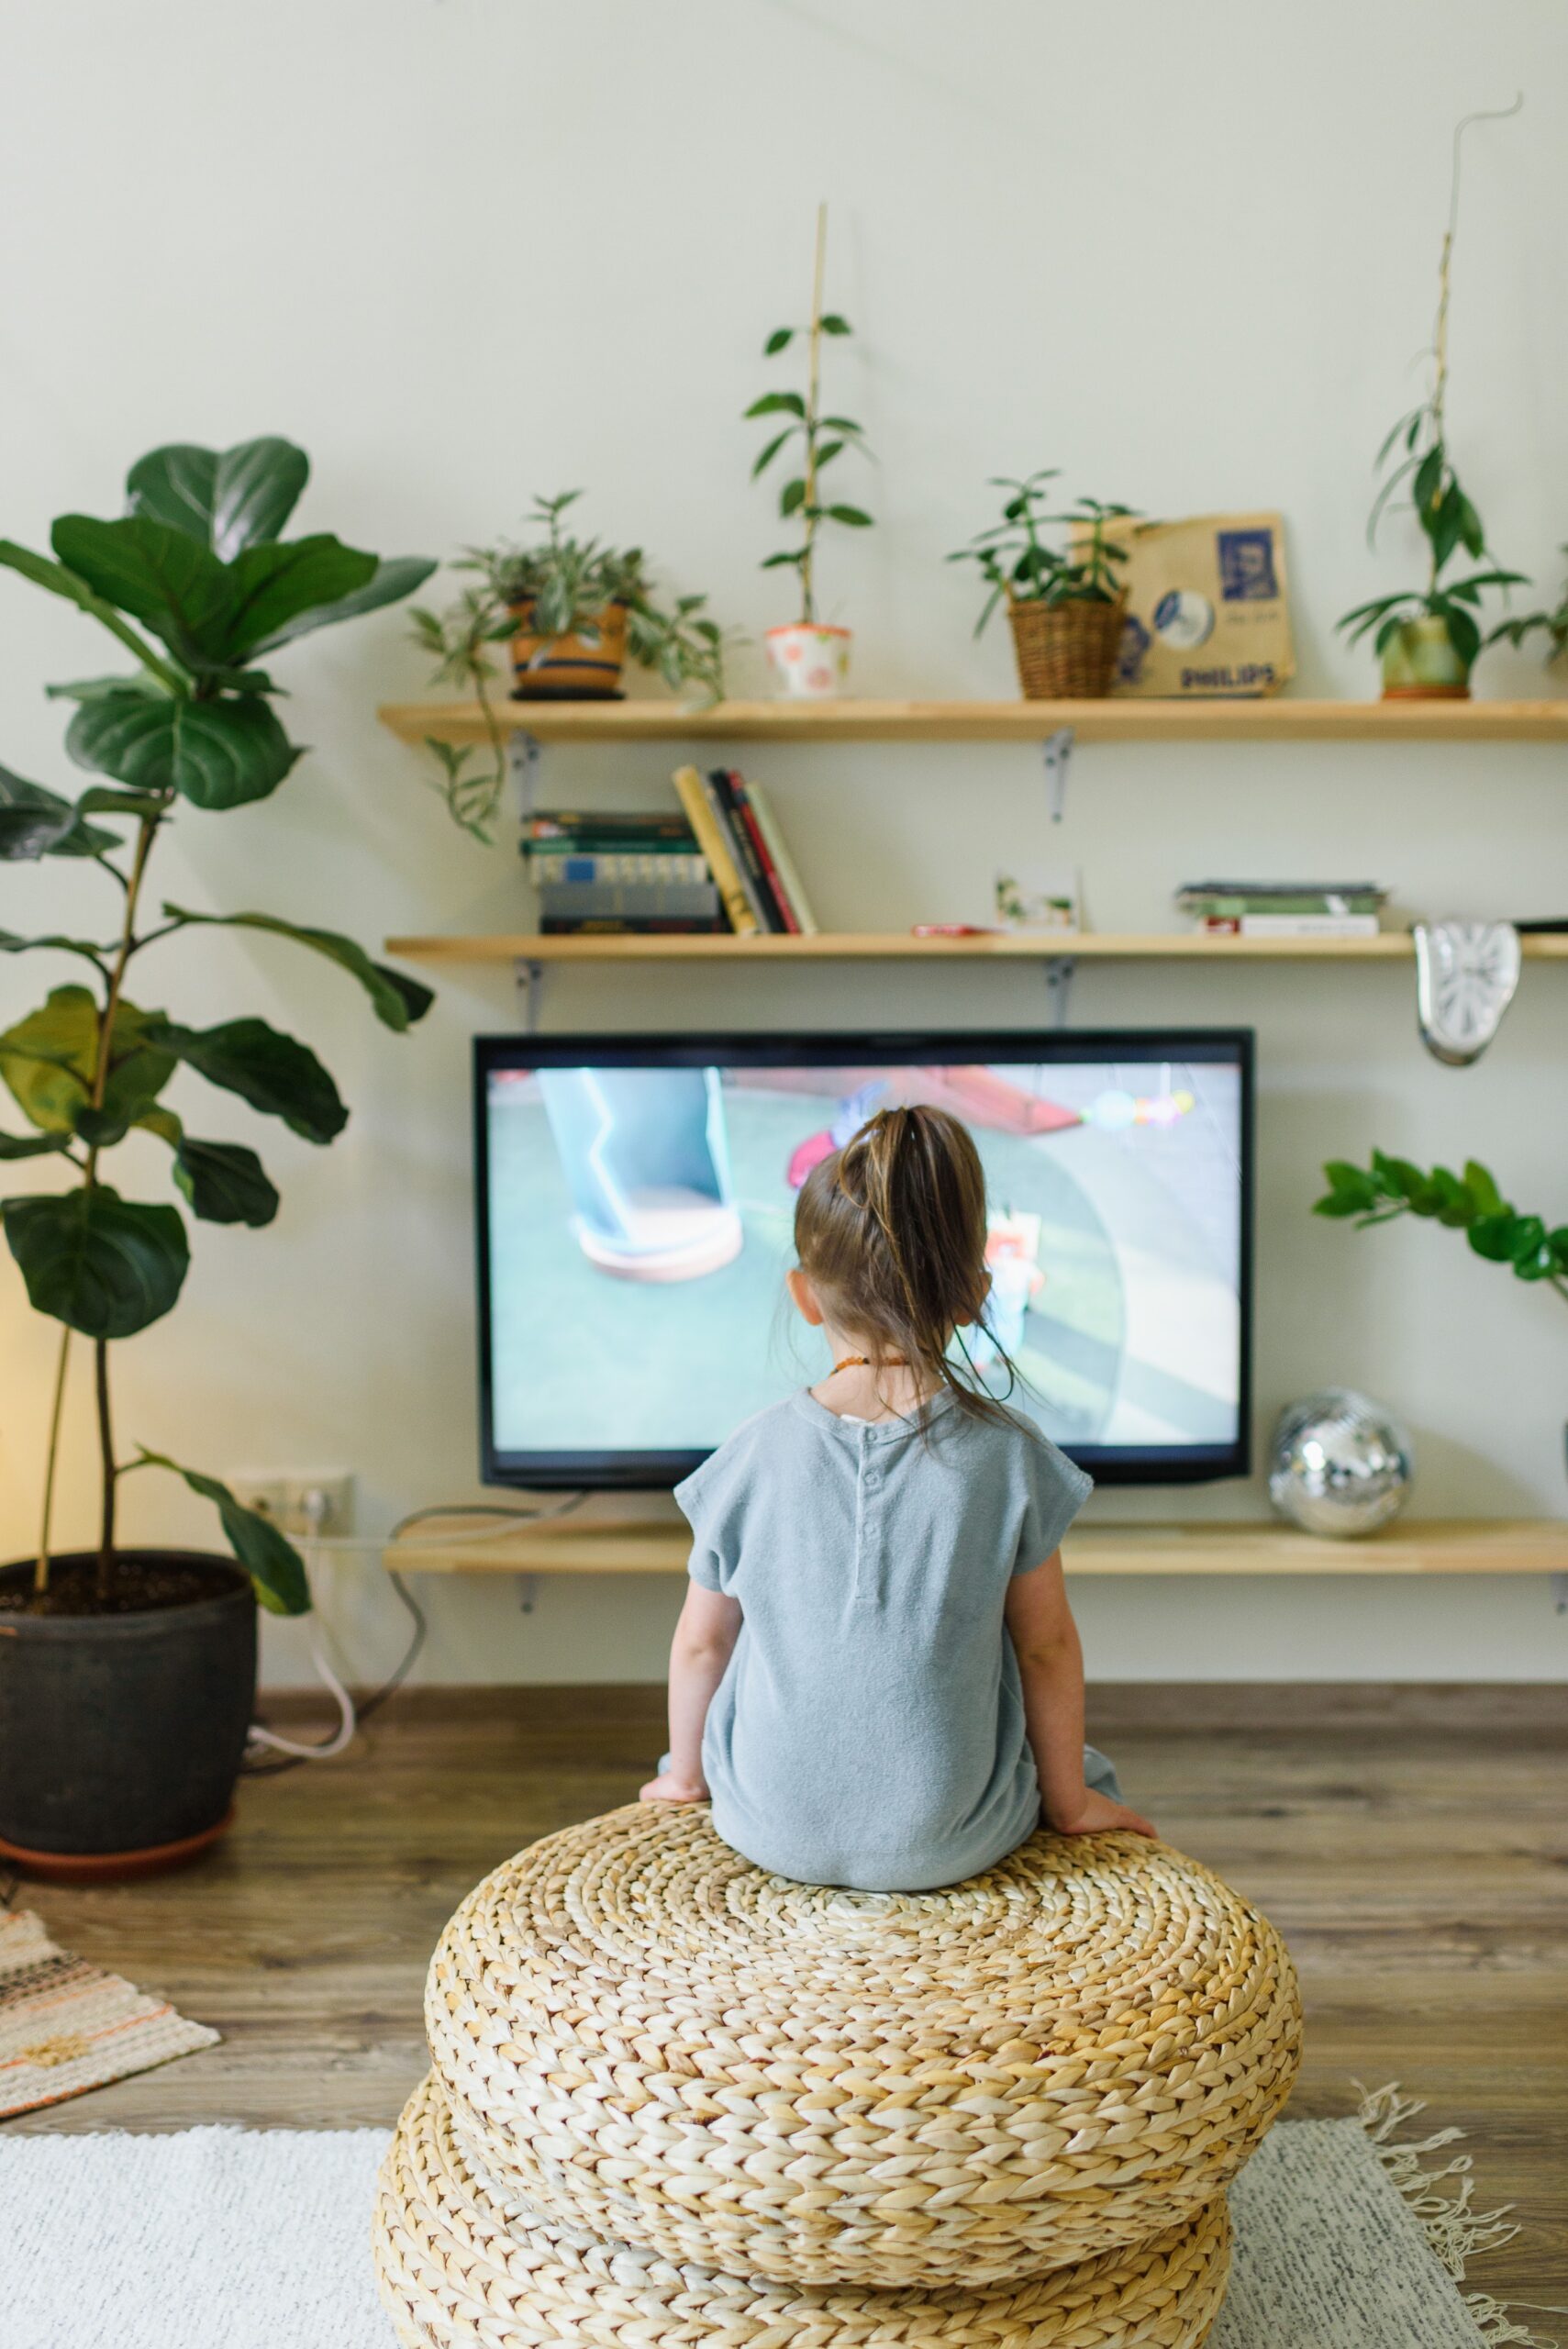 Young child sitting down in front of television